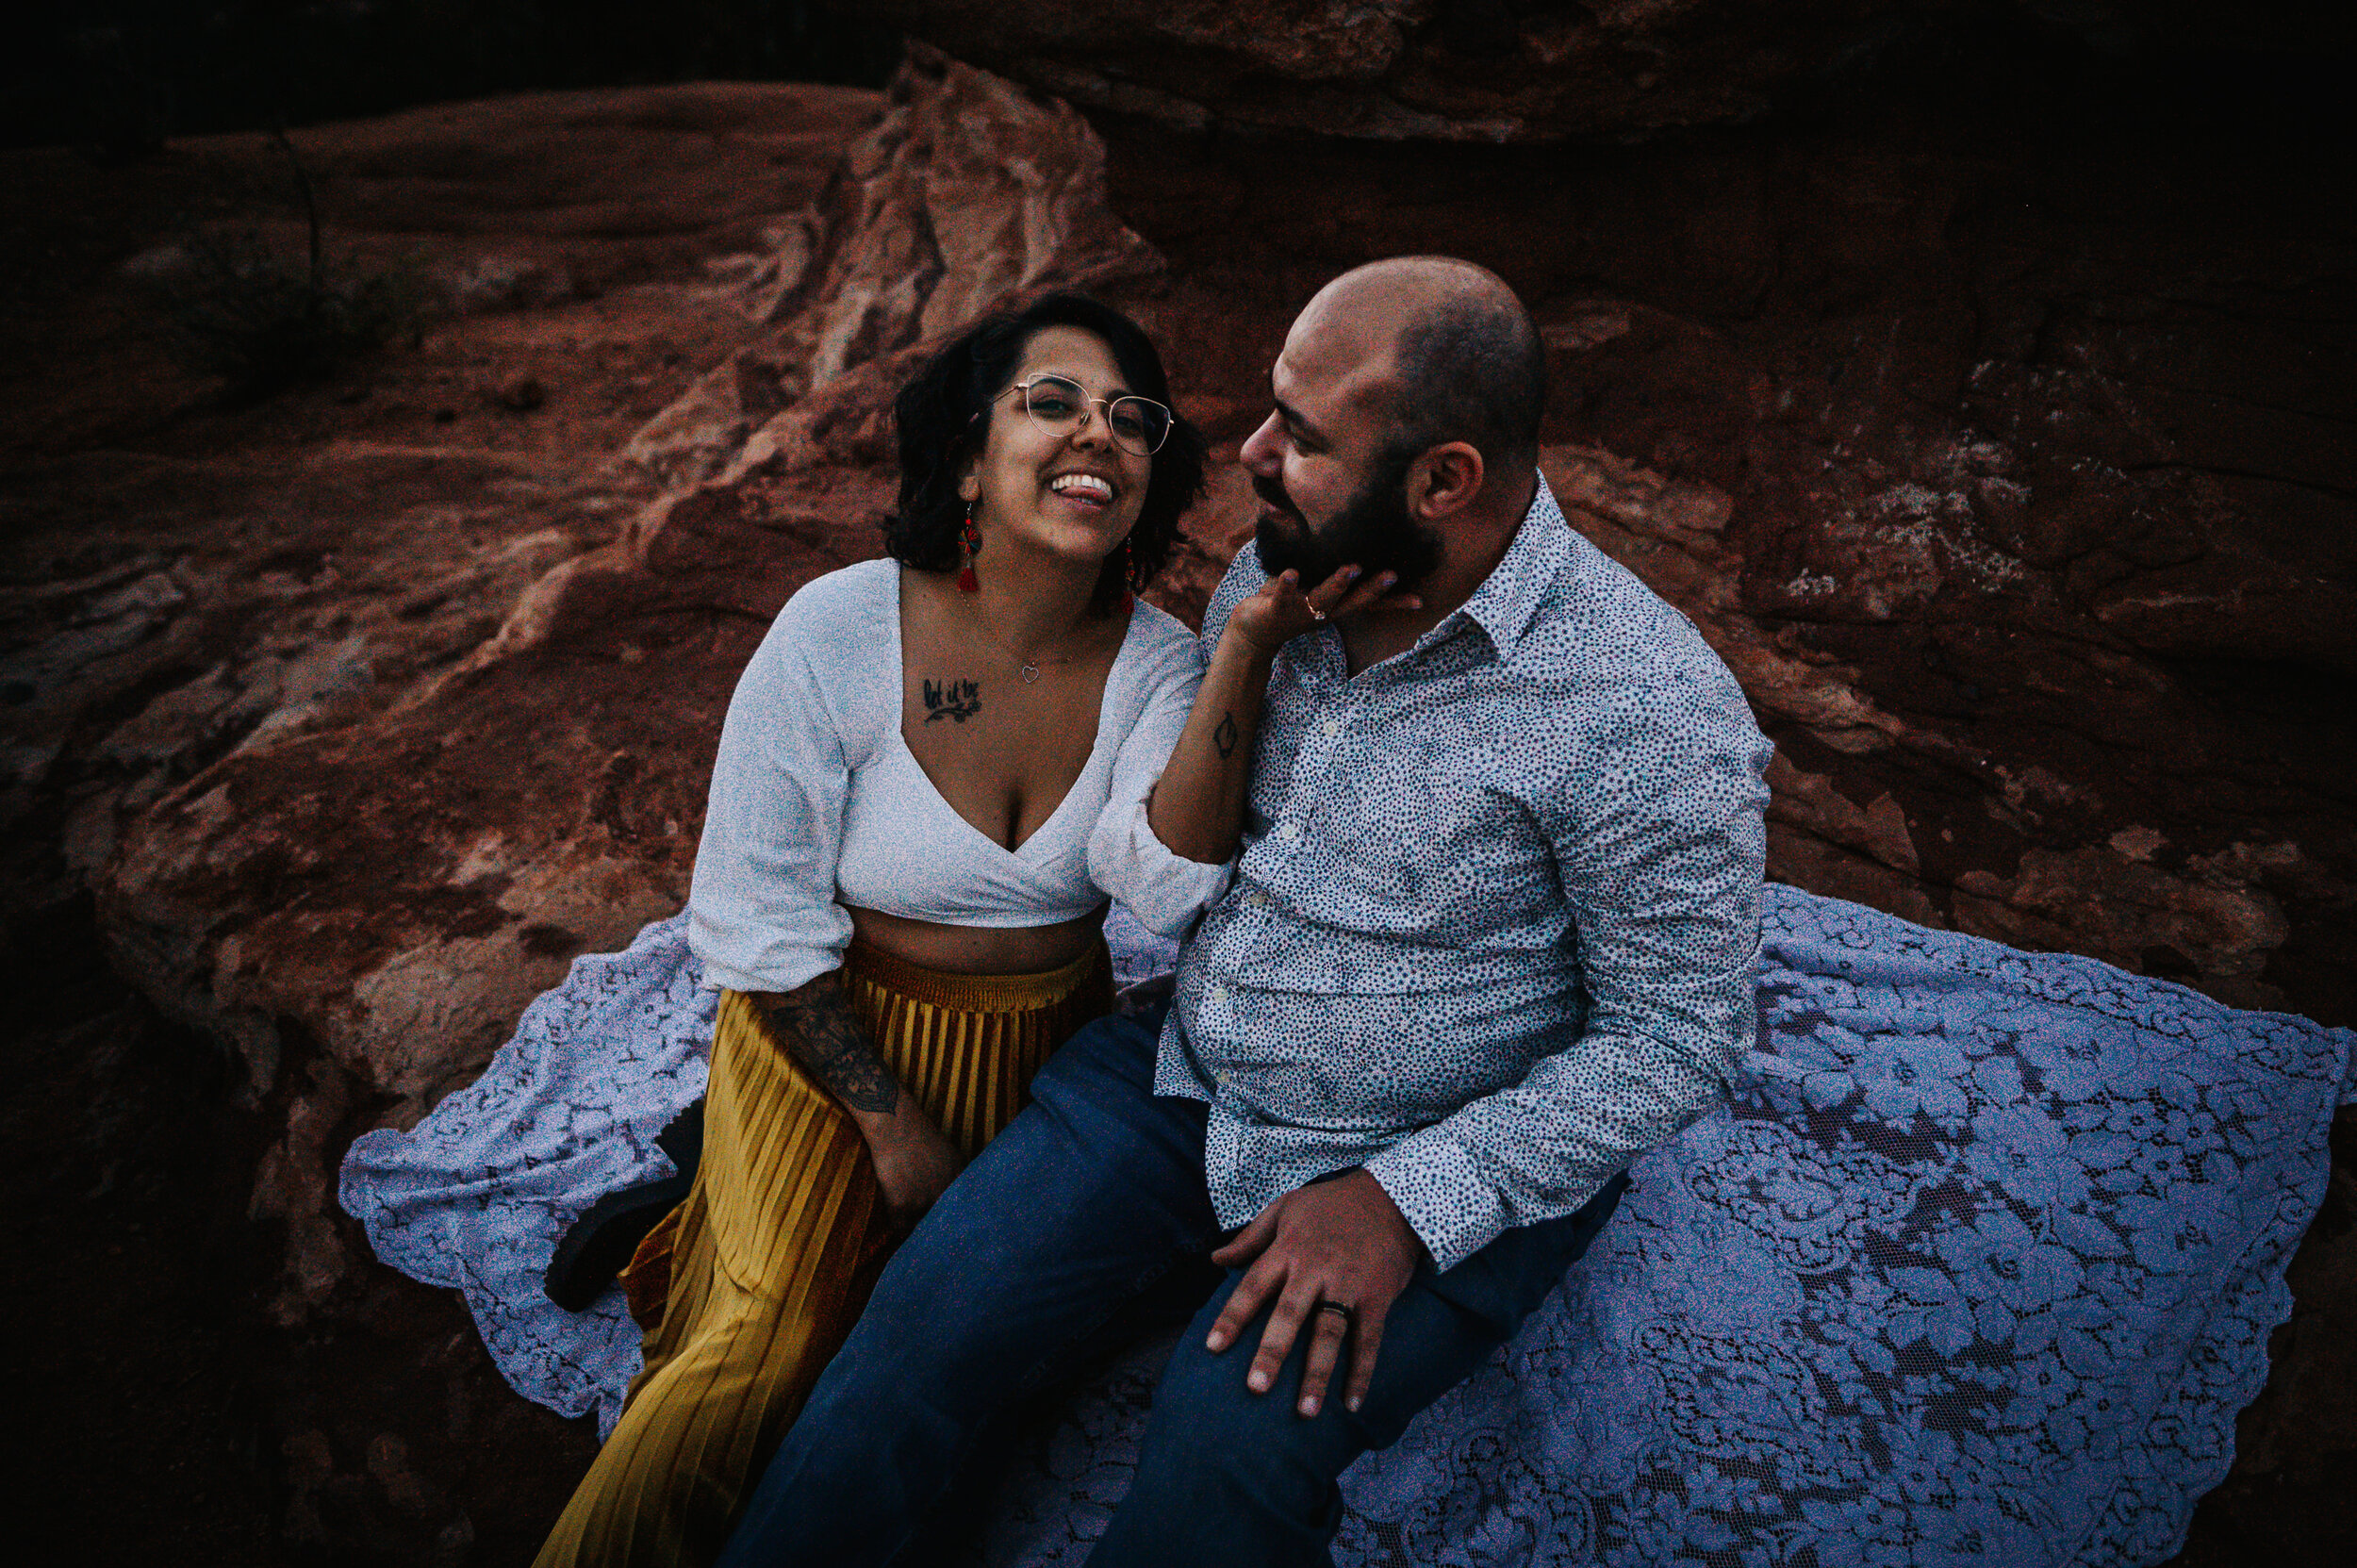 Caroline and Tommy Engagement Session Colorado Springs Colorado Garden of the Gods Wild Prairie Photography-22-2021.jpg